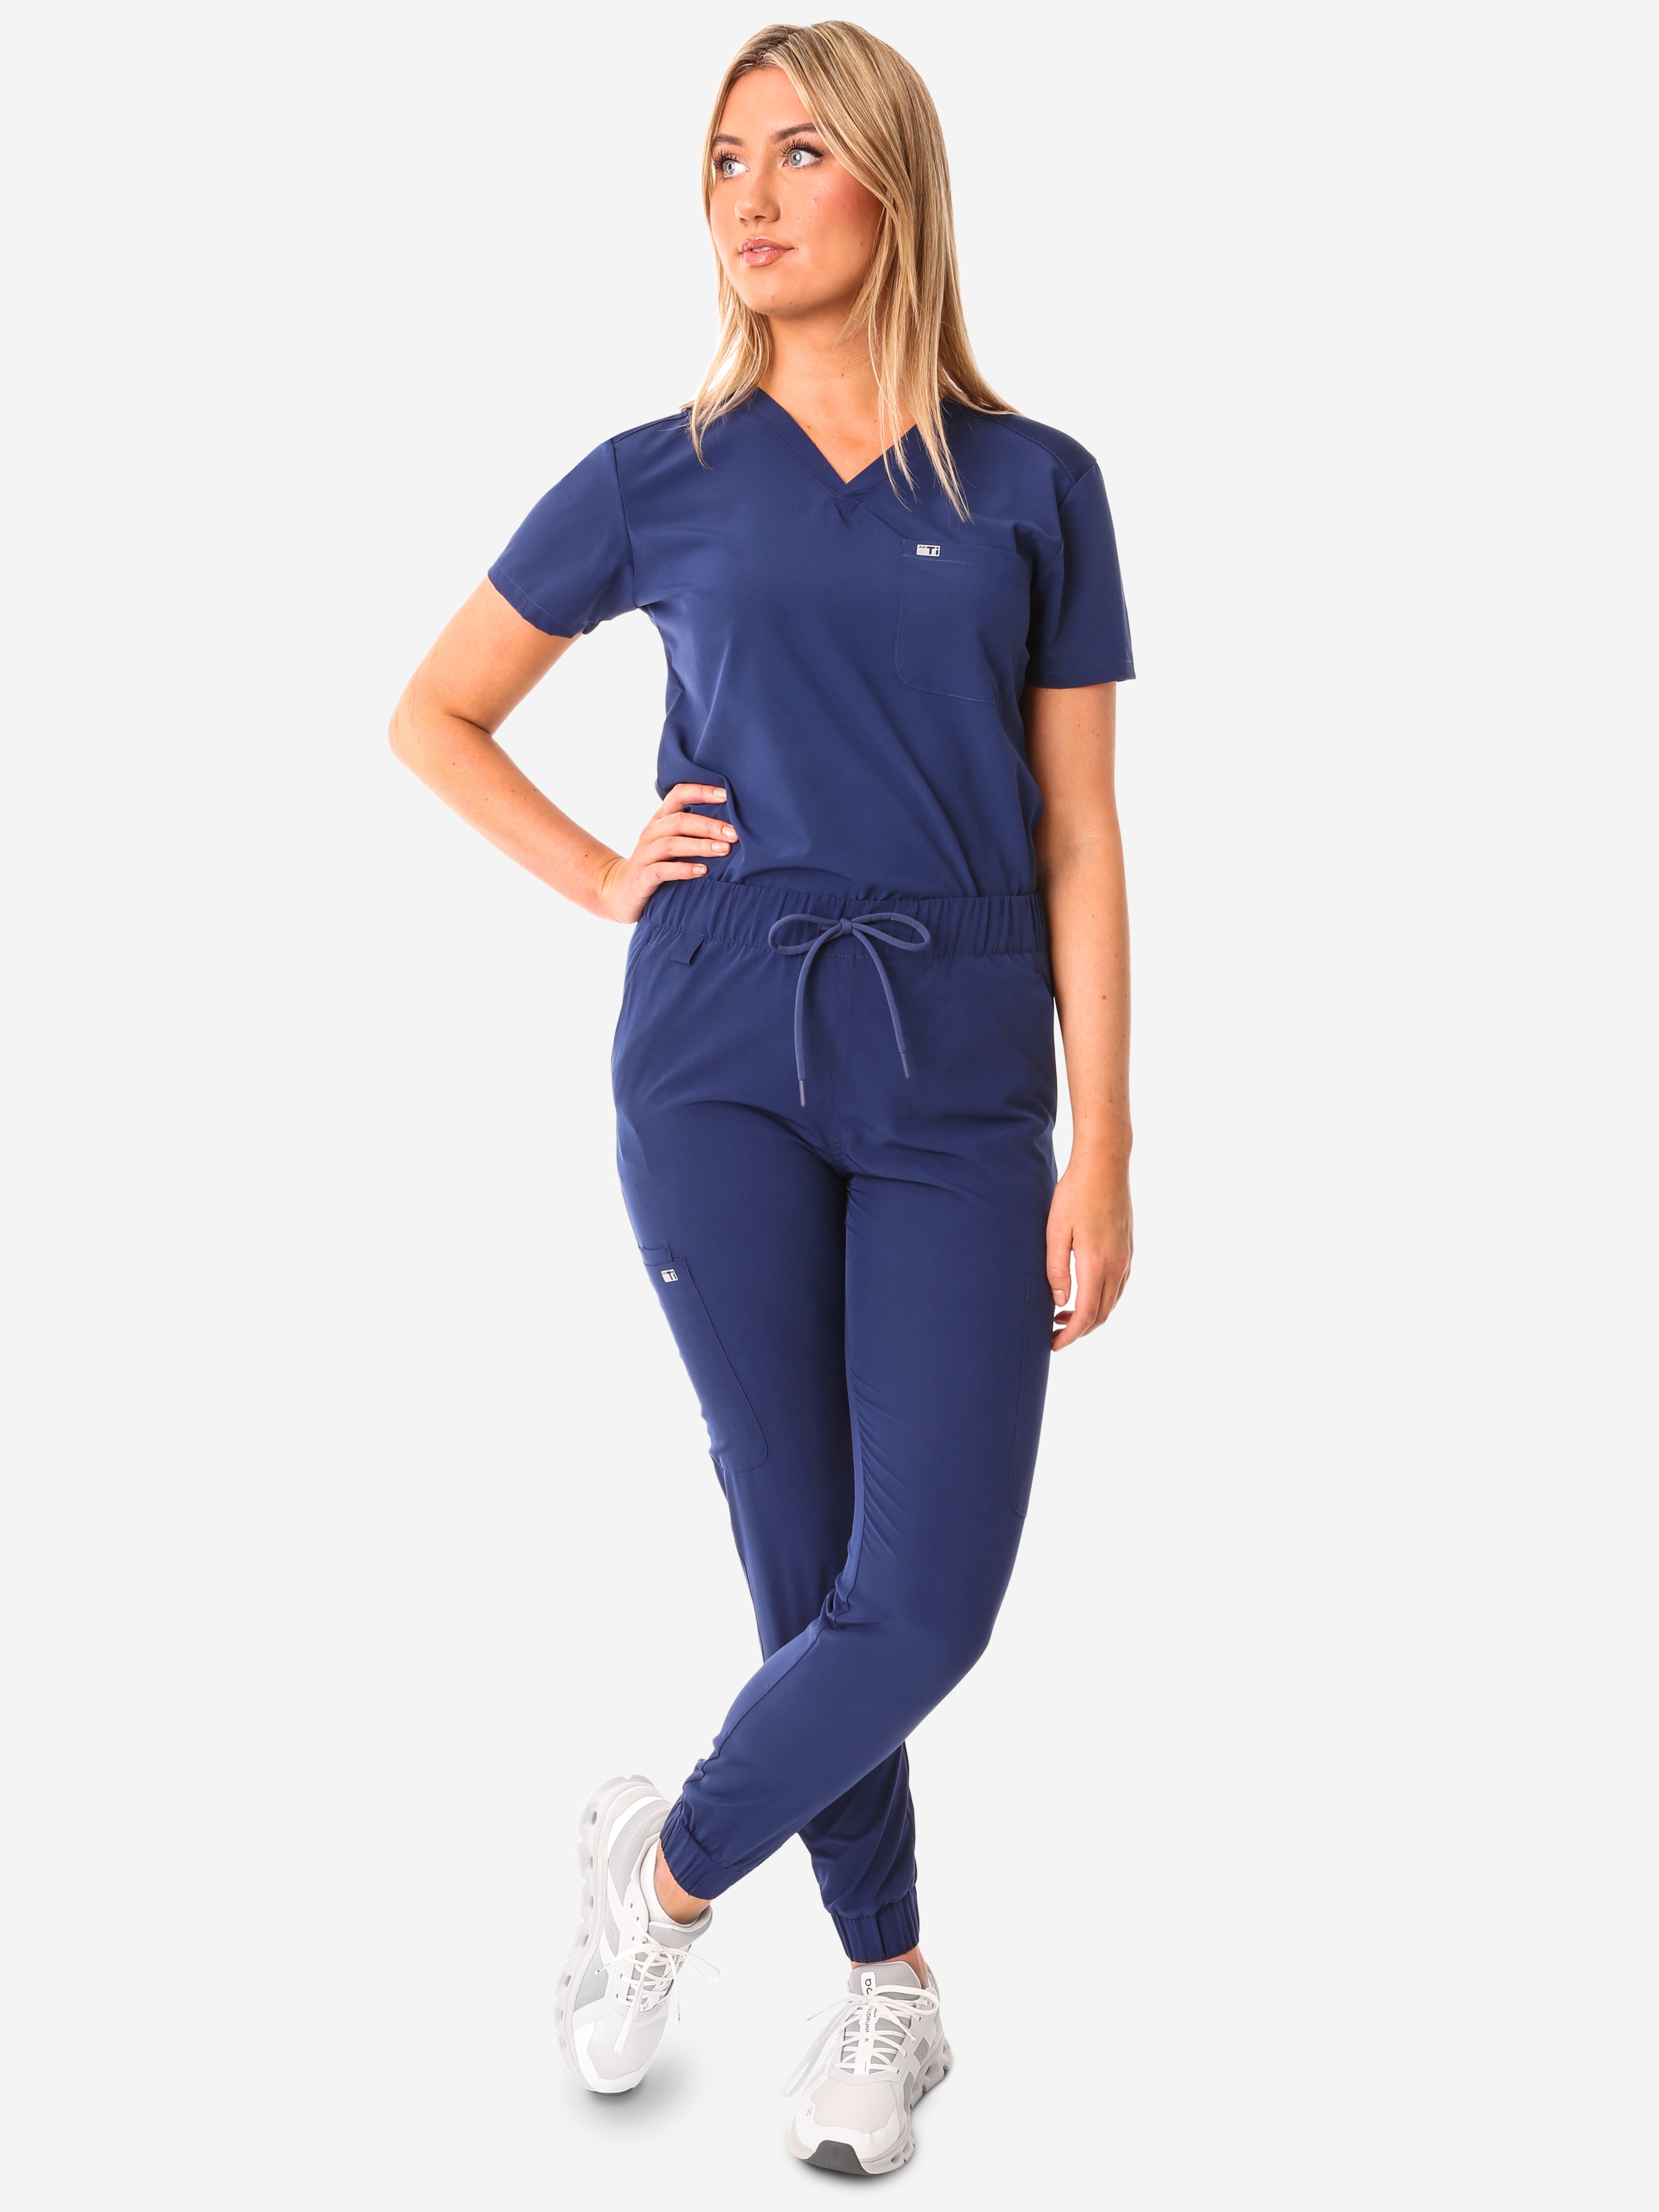 TiScrubs Navy Blue Women&#39;s Stretch Perfect Jogger Pants and One-Pocket Tuckable Top Front View Full Body